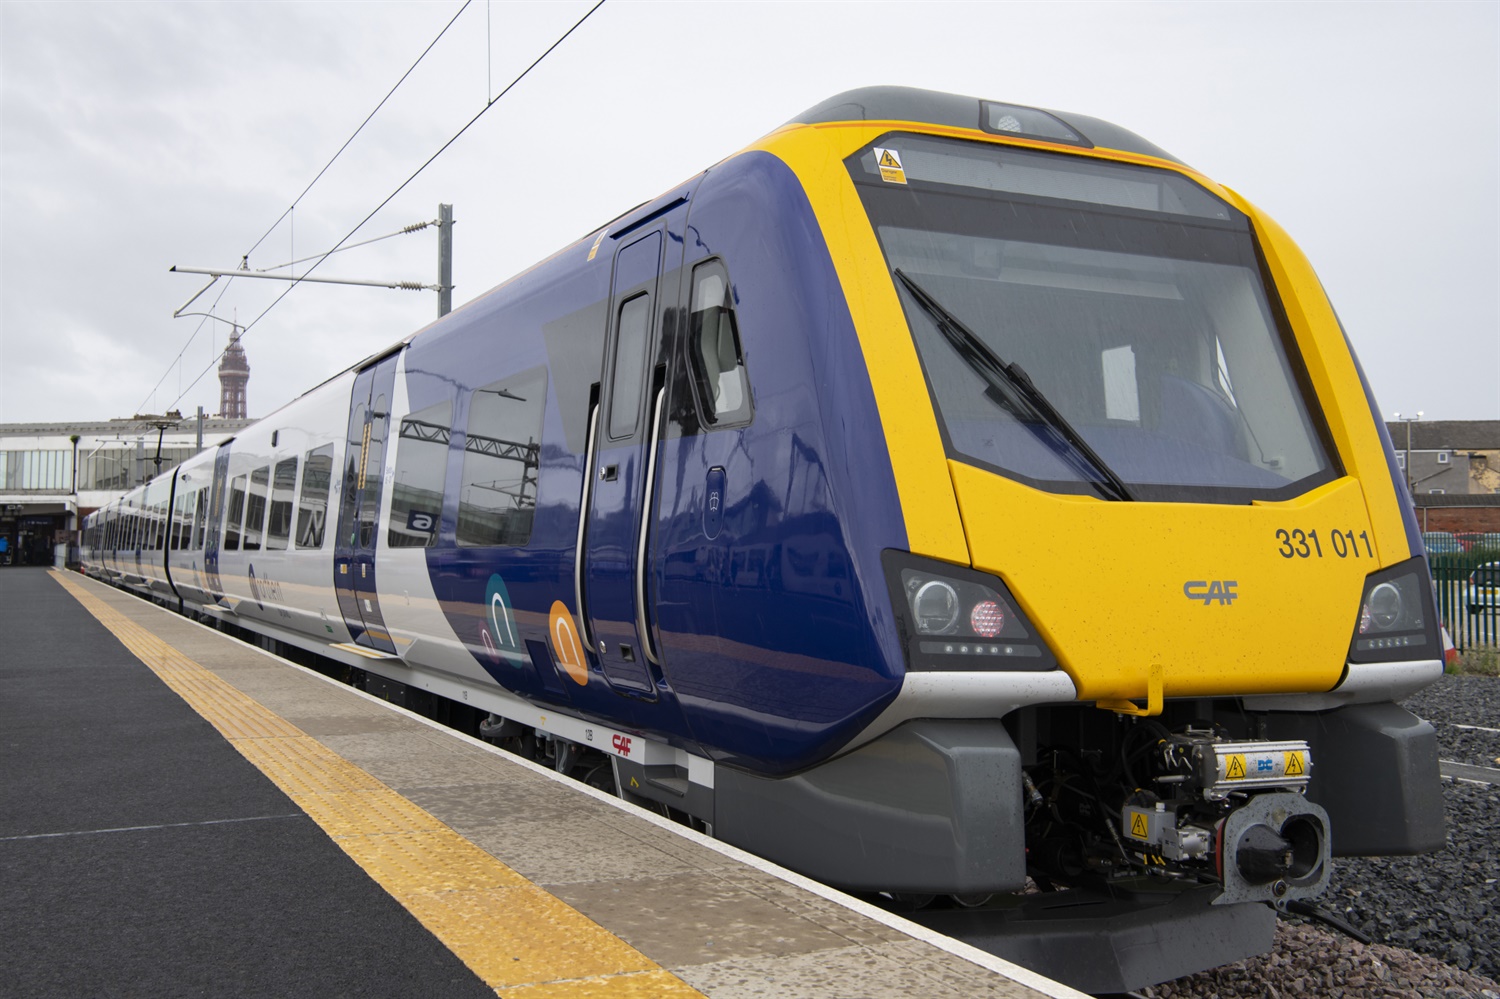 Northern increases services for Blackpool 